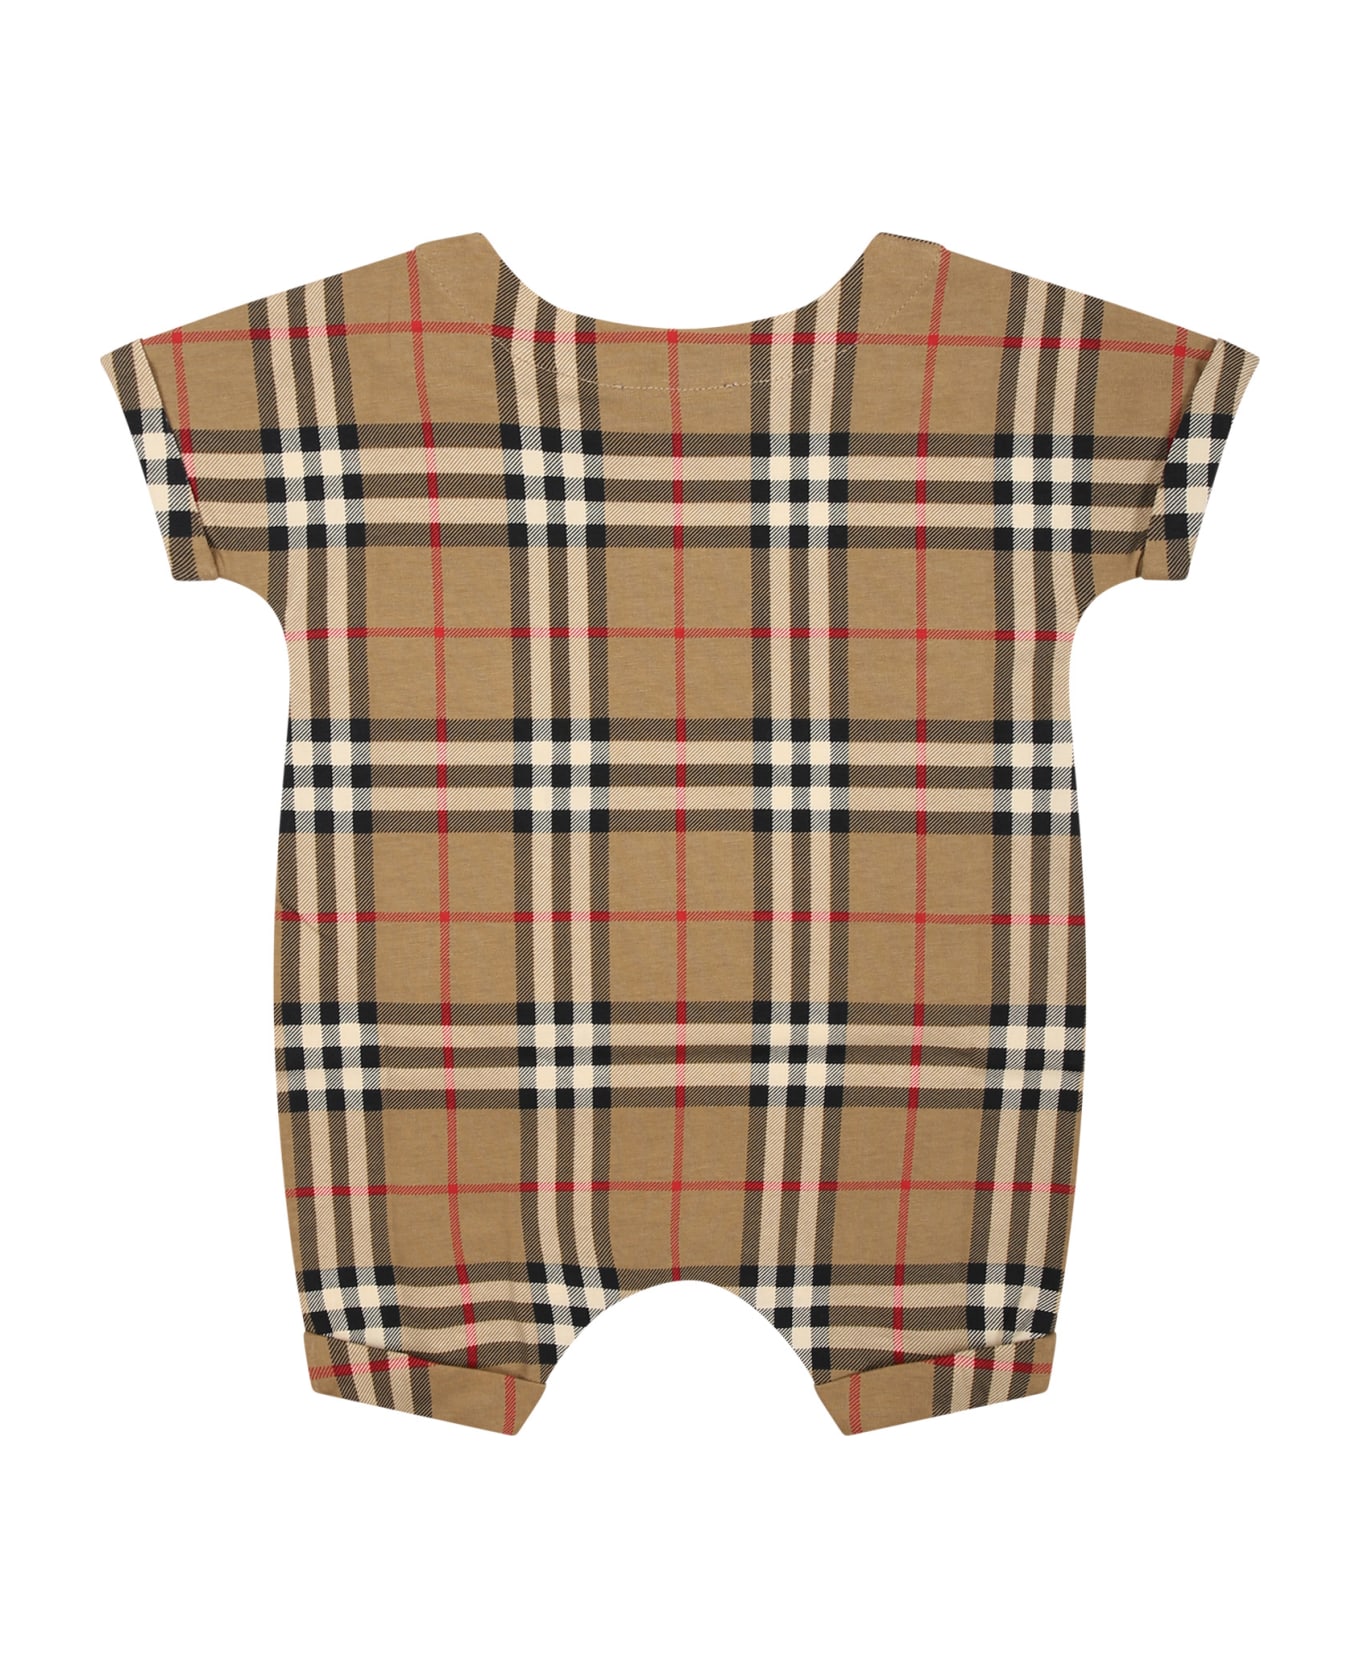 Burberry Beige Baby Bodysuit With Iconic All-over Vintage Check - Beige